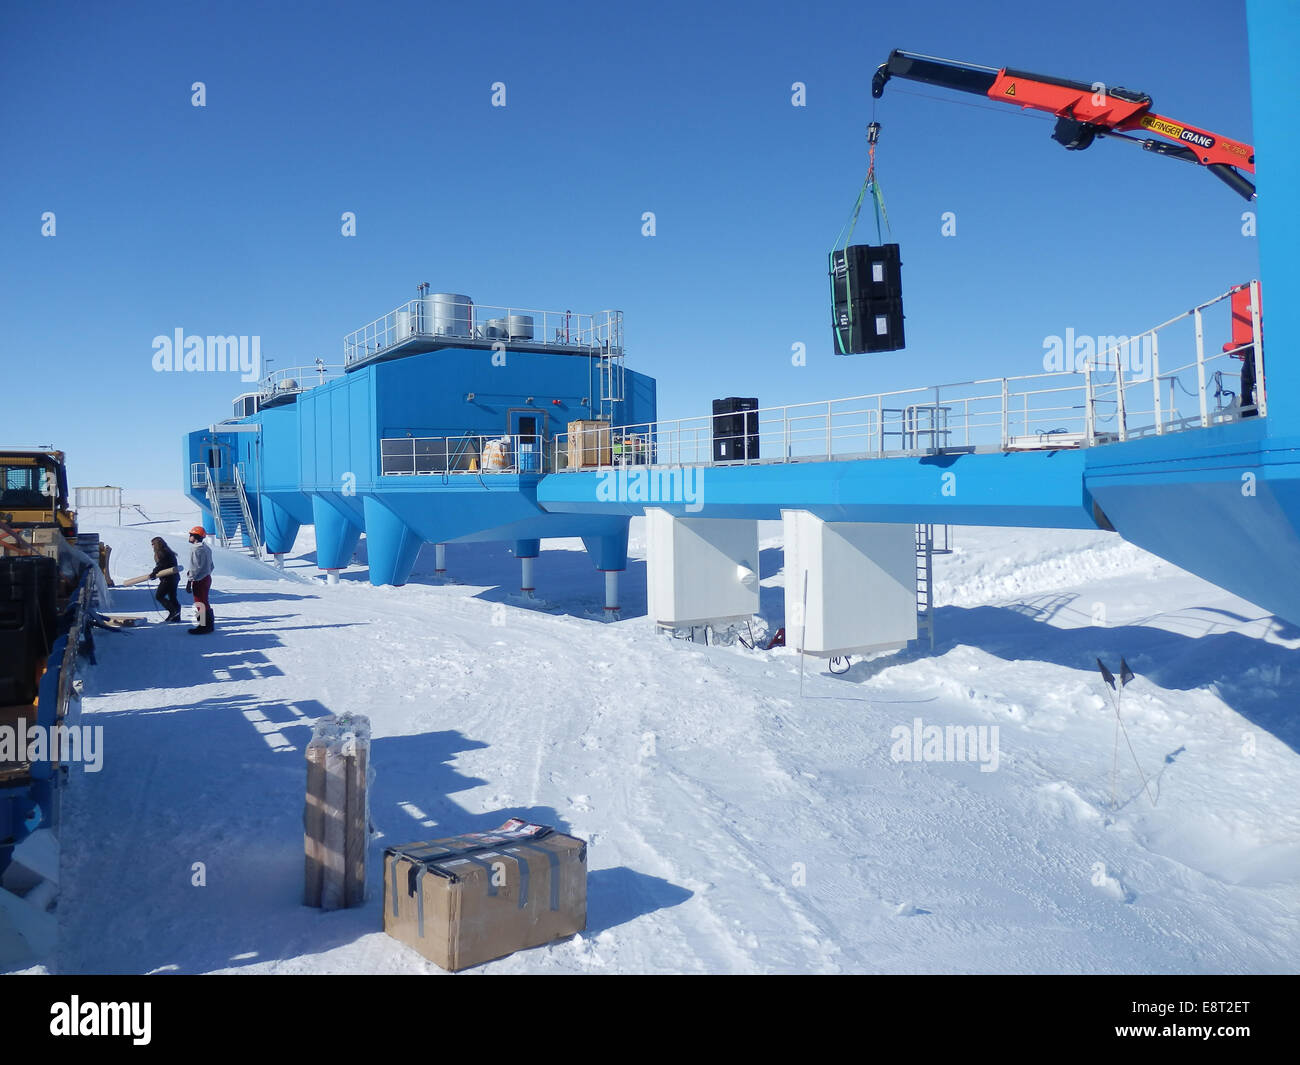 A crane lowers two BARREL balloon payloads onto the platform at Halley Research Station in Antarctica. Stock Photo